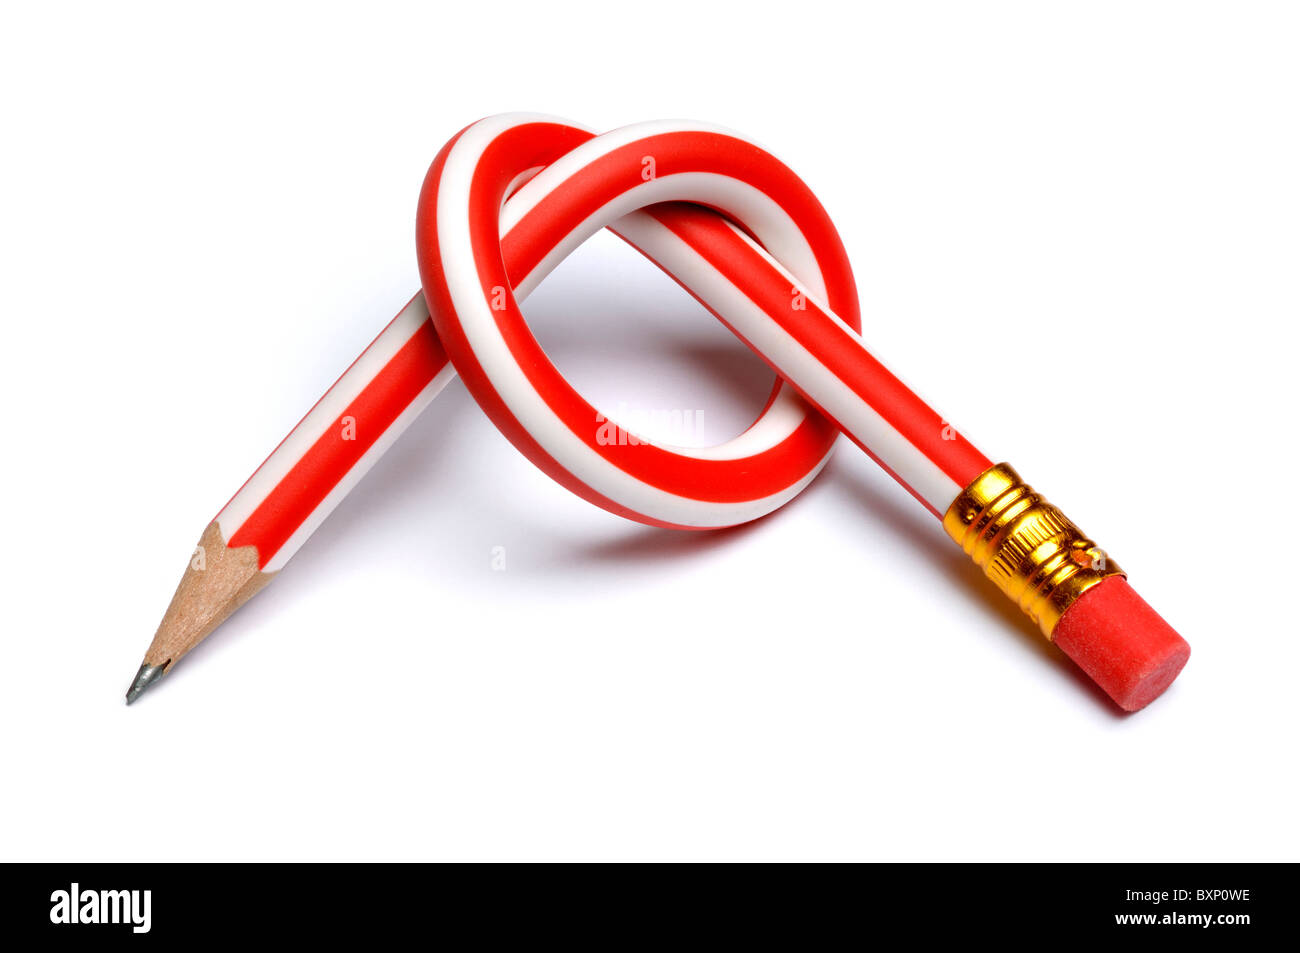 Pencil tied in a knot Stock Photo - Alamy